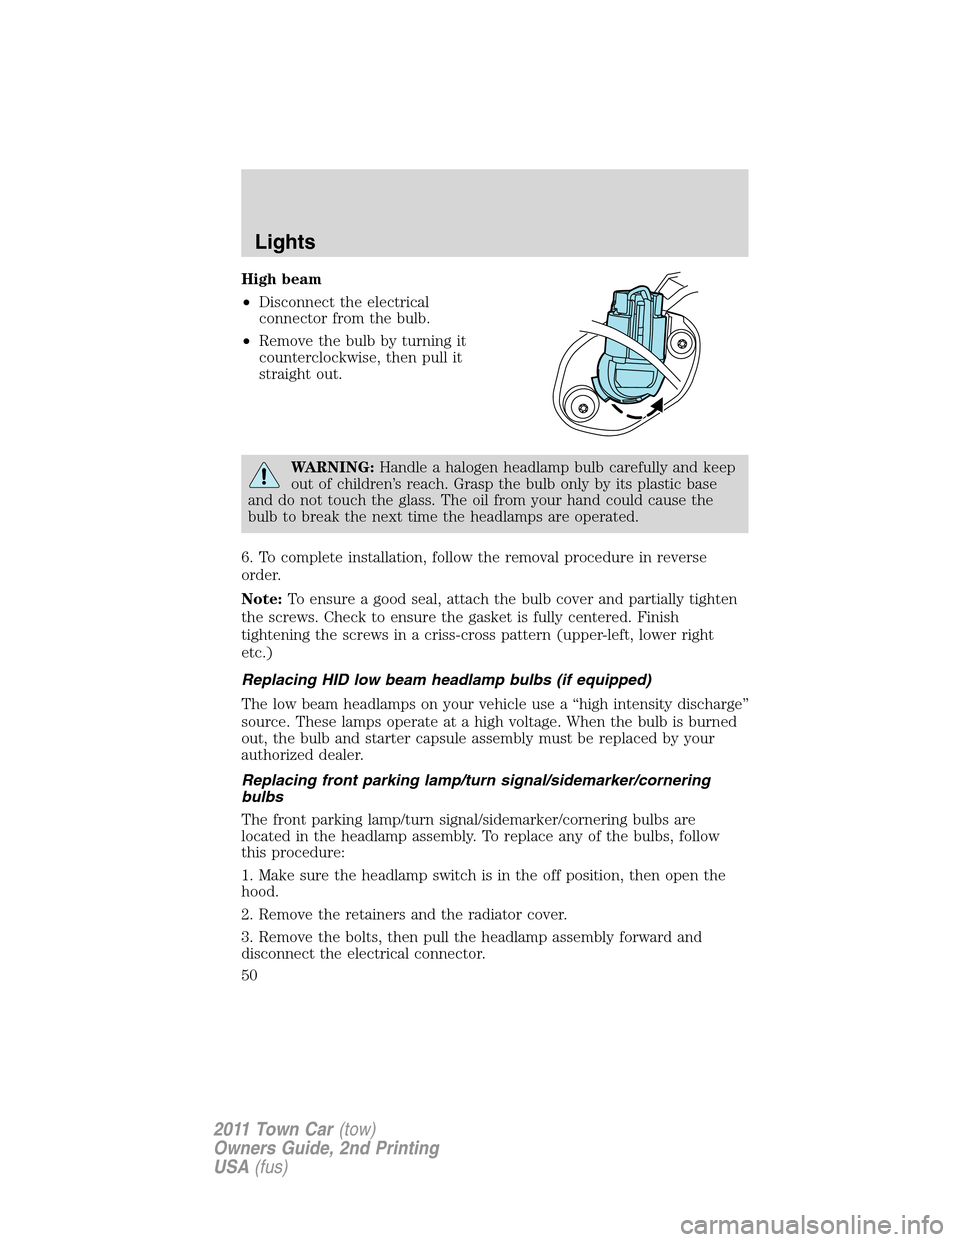 LINCOLN TOWN CAR 2011 Service Manual High beam
•Disconnect the electrical
connector from the bulb.
•Remove the bulb by turning it
counterclockwise, then pull it
straight out.
WARNING:Handle a halogen headlamp bulb carefully and keep
